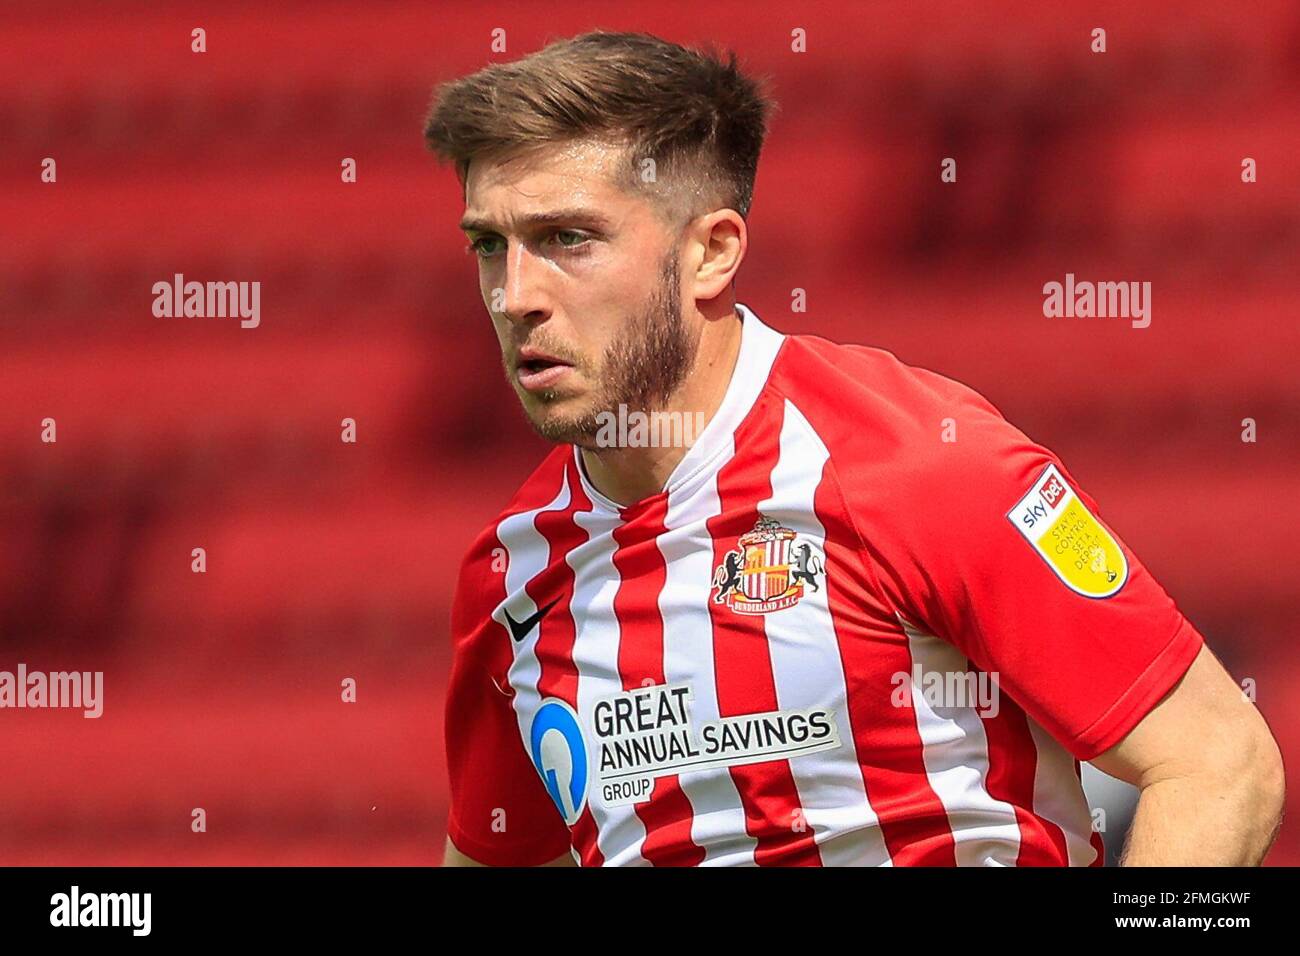 Lynden Gooch #11 of Sunderland during the game Stock Photo